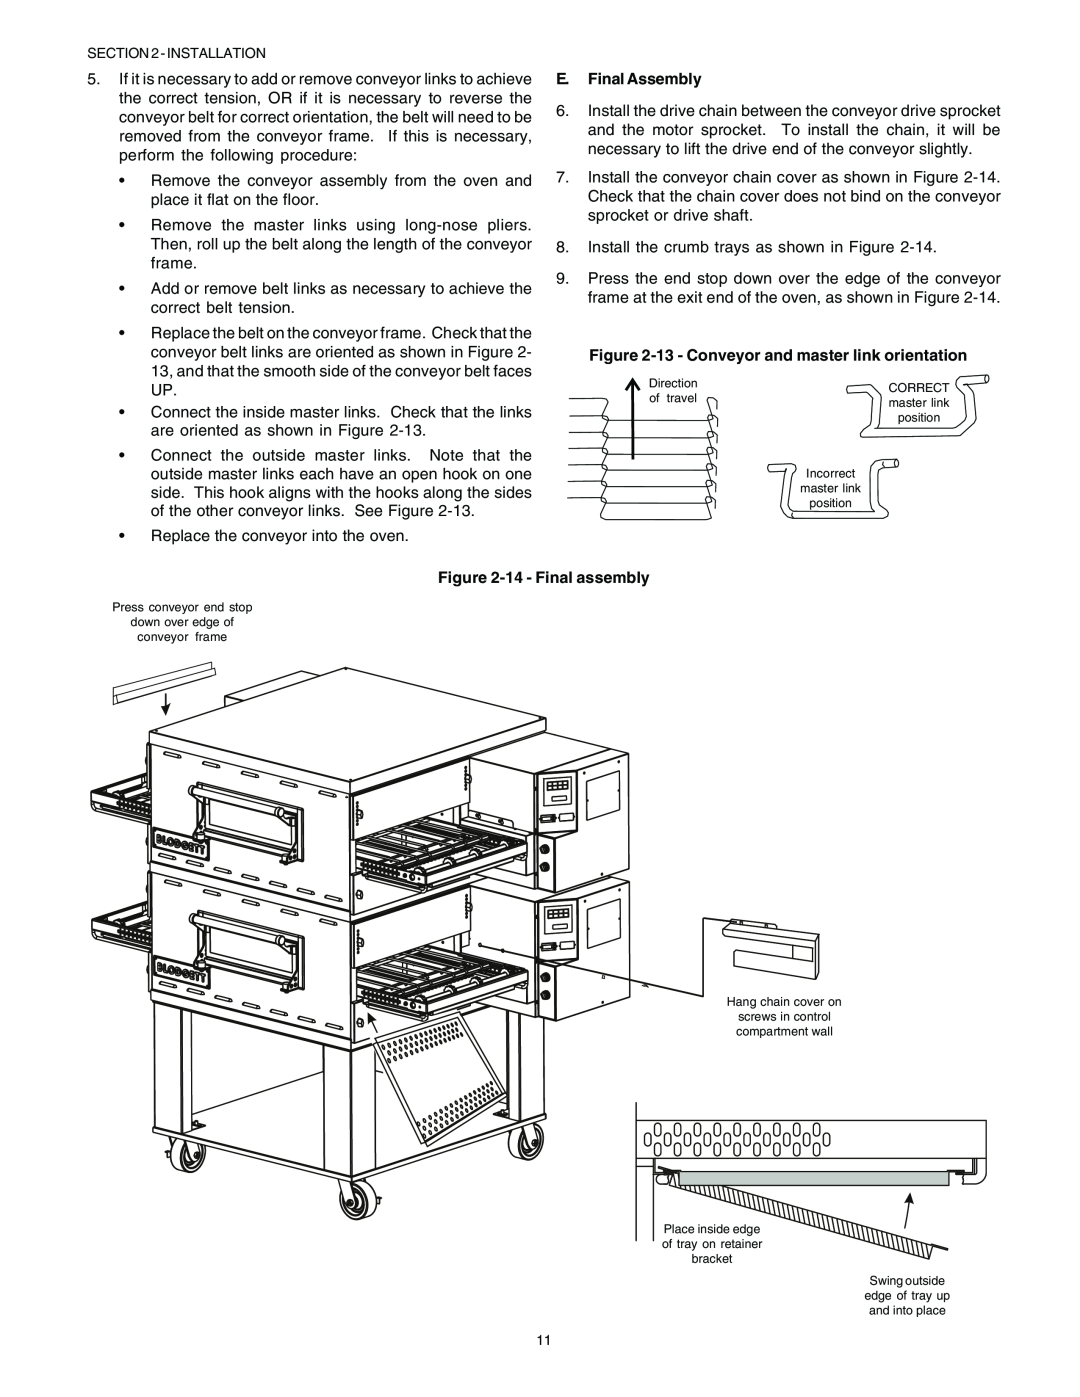 Blodgett BG2136 English, Replace the conveyor into the oven, E. Final Assembly, 13 - Conveyor and master link orientation 